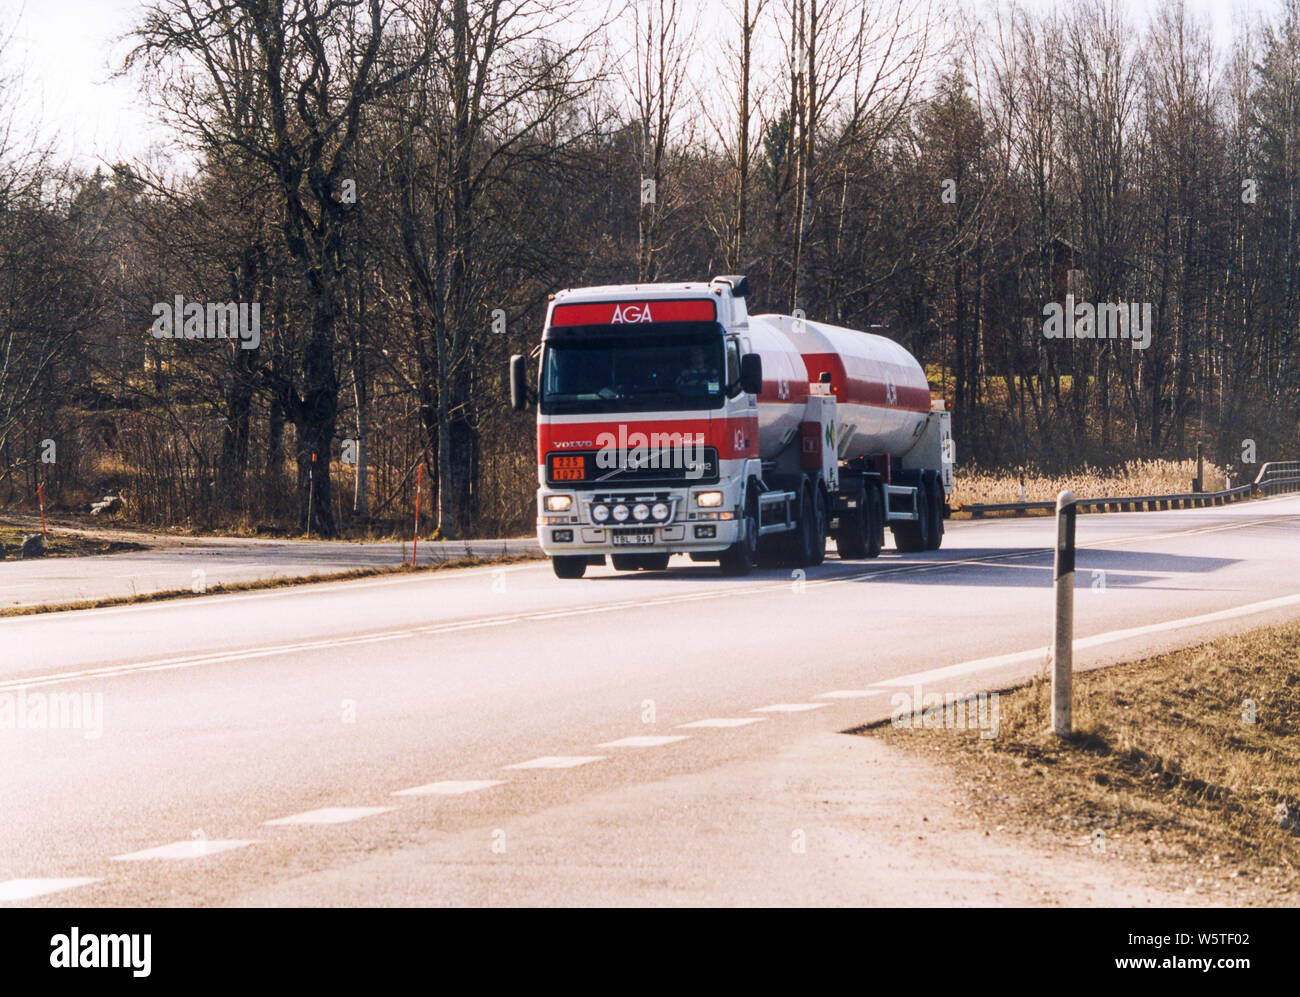 LORRIES ON THE ROAD with goods Stock Photo